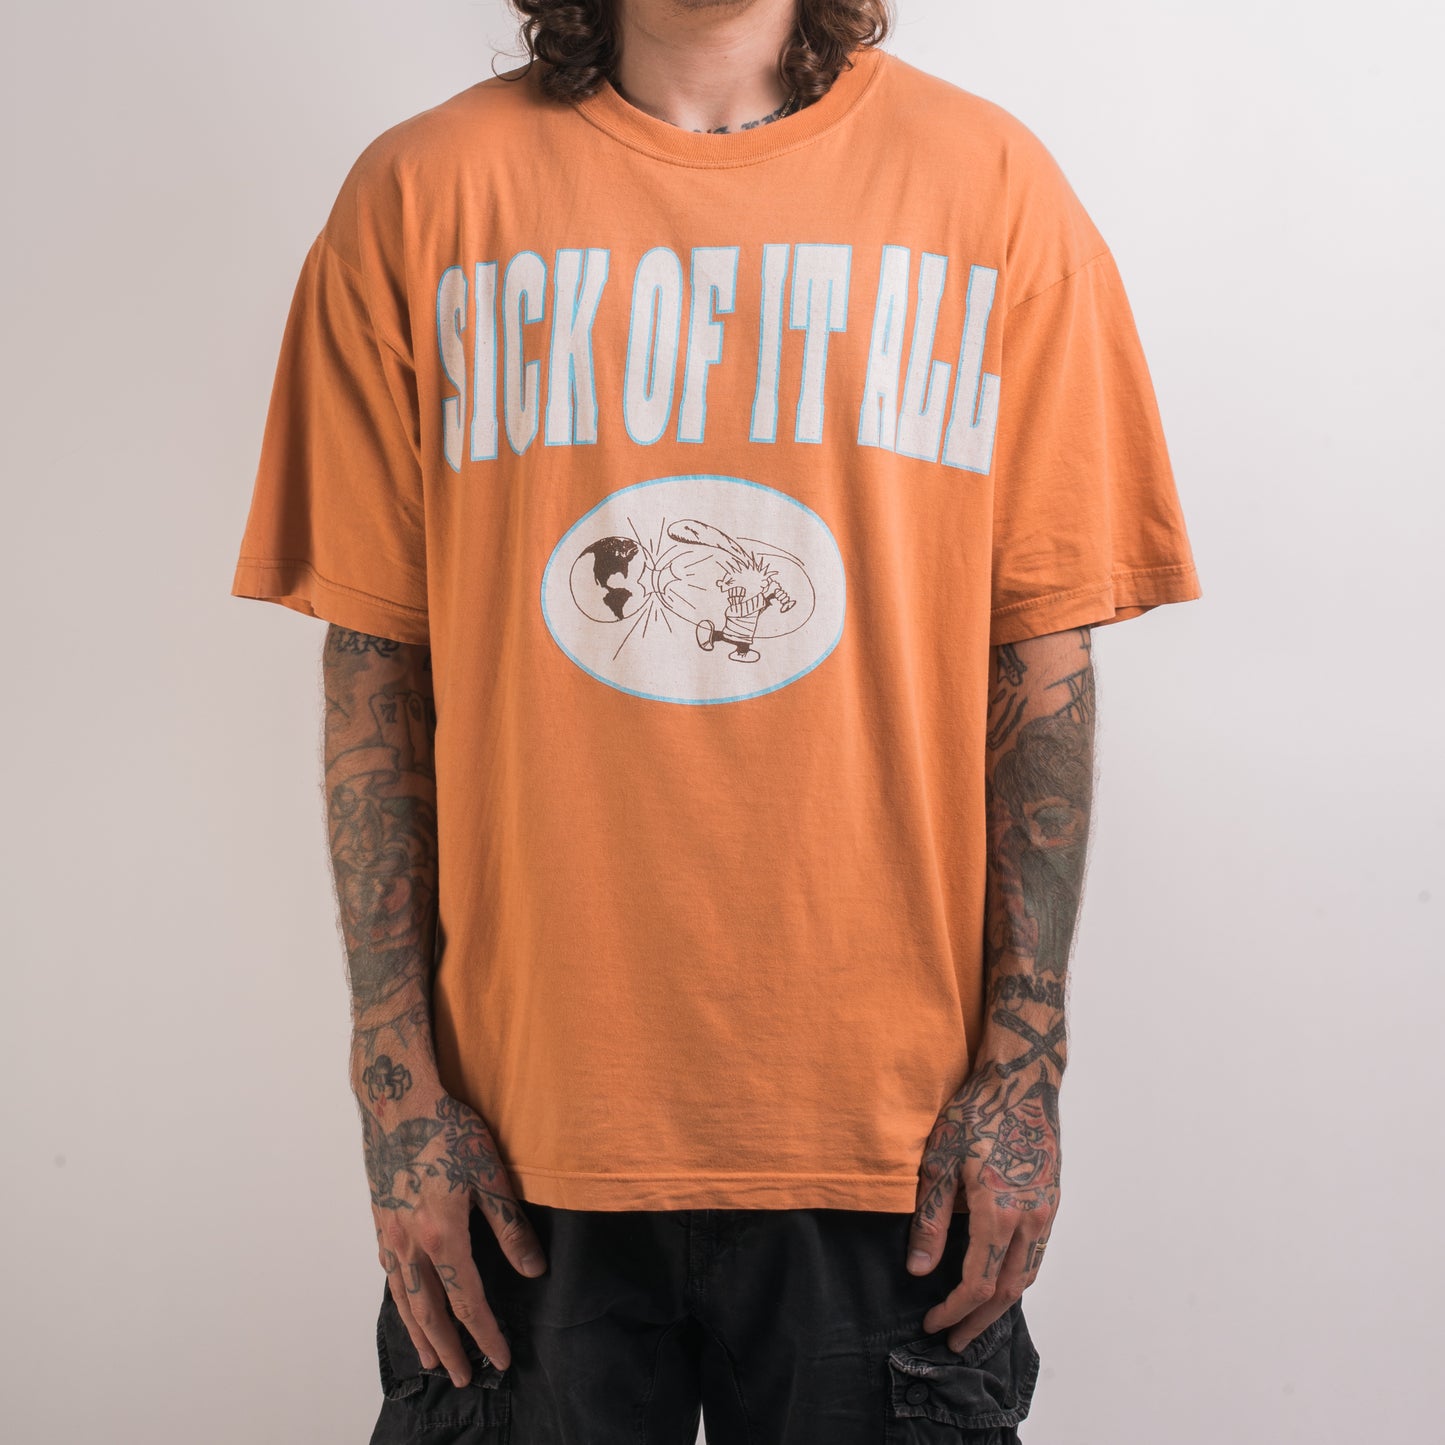 Vintage 90’s Sick Of It All Calvin T-Shirt